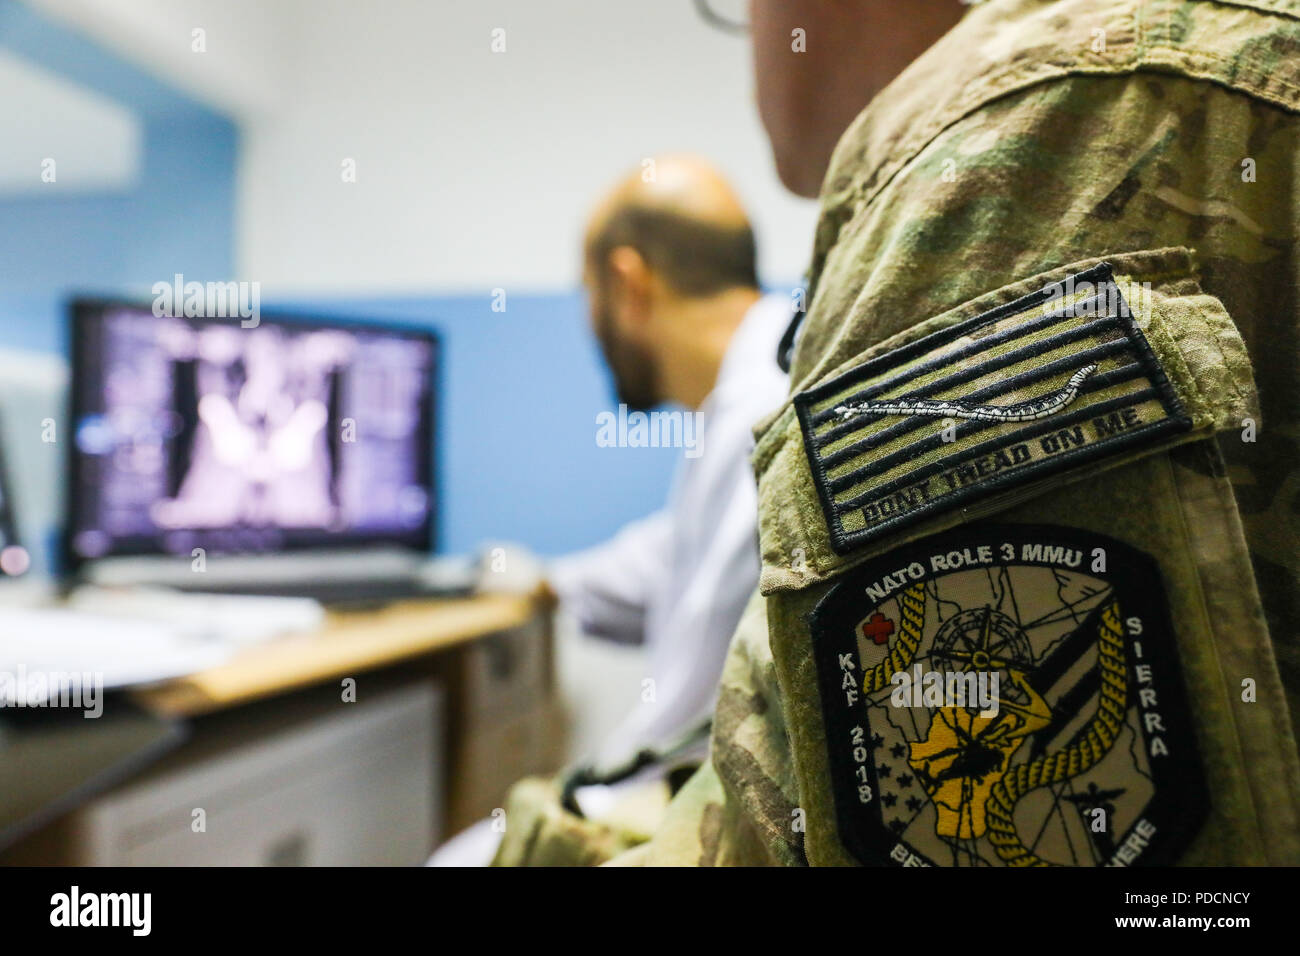 KANDAHAR PROVINCE, Afghanistan (August 5, 2018) -- U.S. Navy Lt. Cdr. Justin S. Clark, radiology technician for Kandahar Airfield NATO Role III Multinational Medical Unit, watches as his Afghan radiology counterpart checks the results of an x-ray, August 5, 2018, during a medical advisory visit at Kandahar Regional Military Hospital, Camp Hero in Kandahar, Afghanistan. Staff members from the Role III conduct routine visits to KRMH to train and advice Afghan medical staff. (U.S. Army photo by Staff Sgt. Neysa Canfield/TAAC-South Public Affairs) Stock Photo